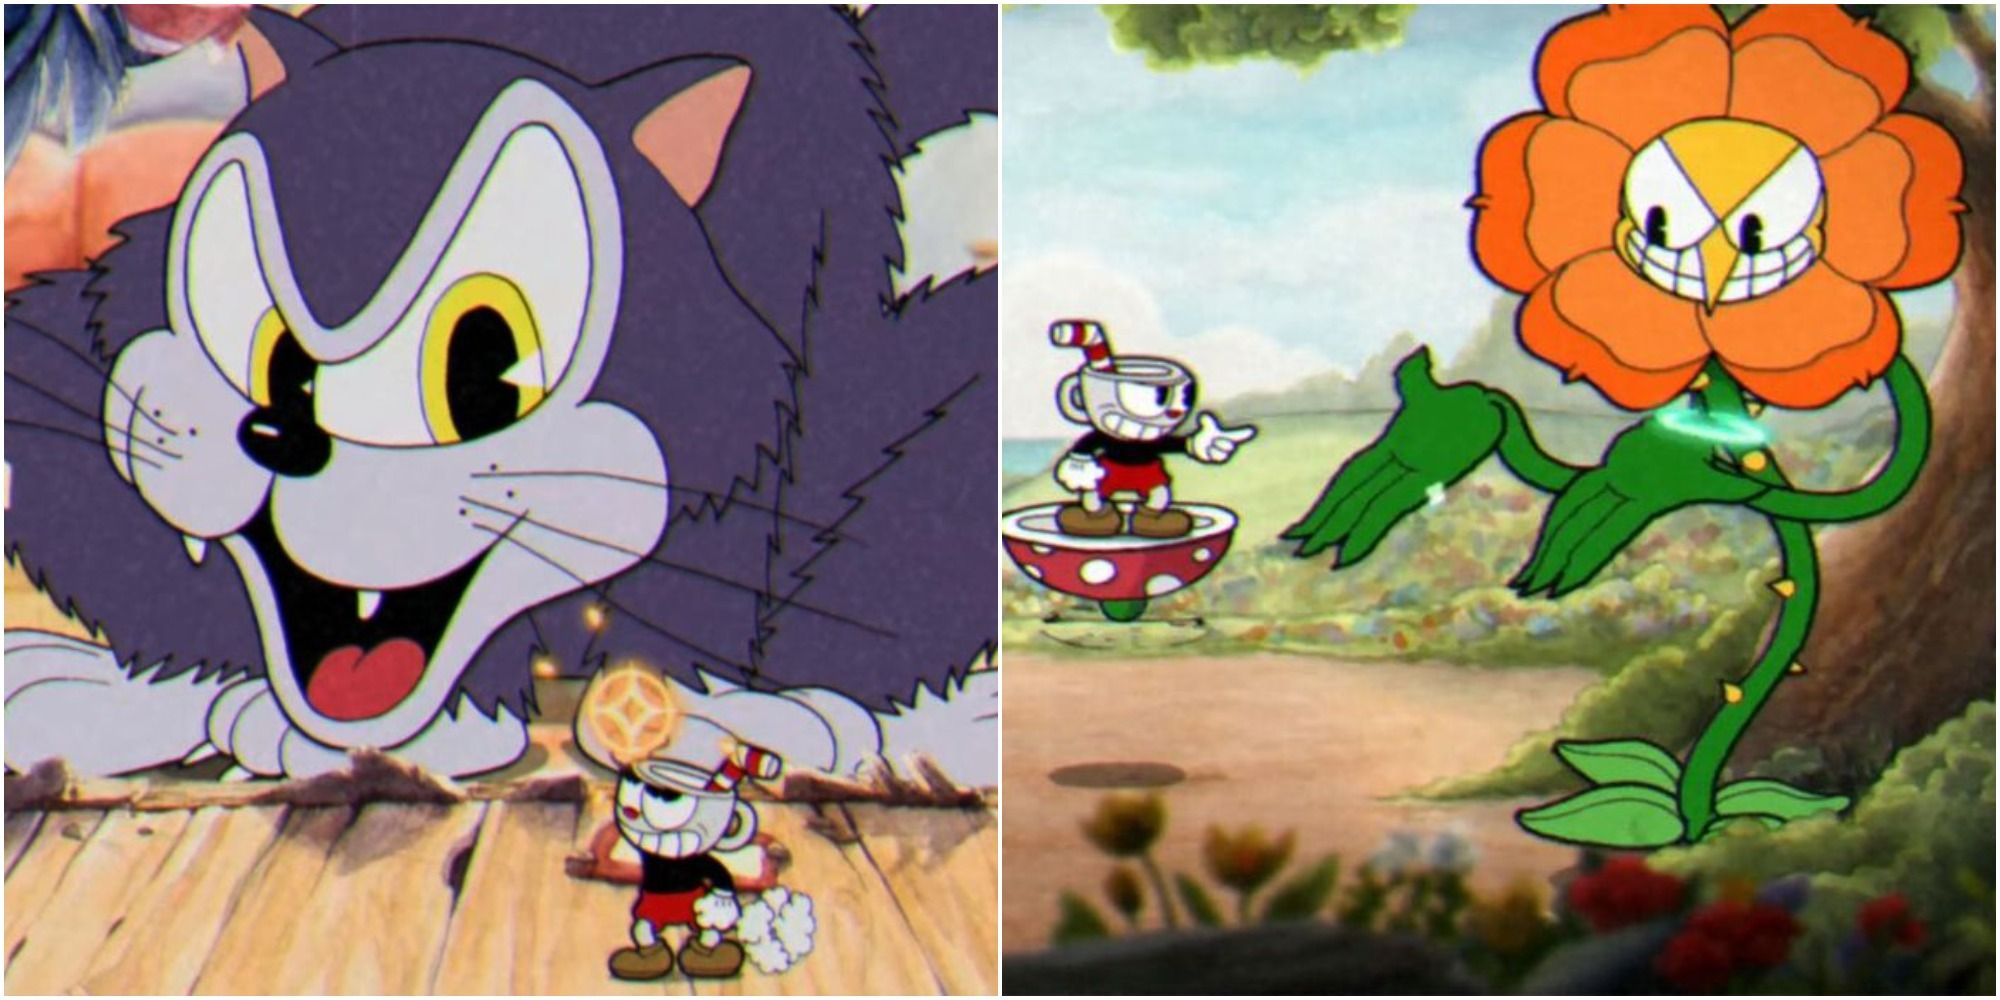 Now, Gordon, it was a canon event. — Cuphead is going to get